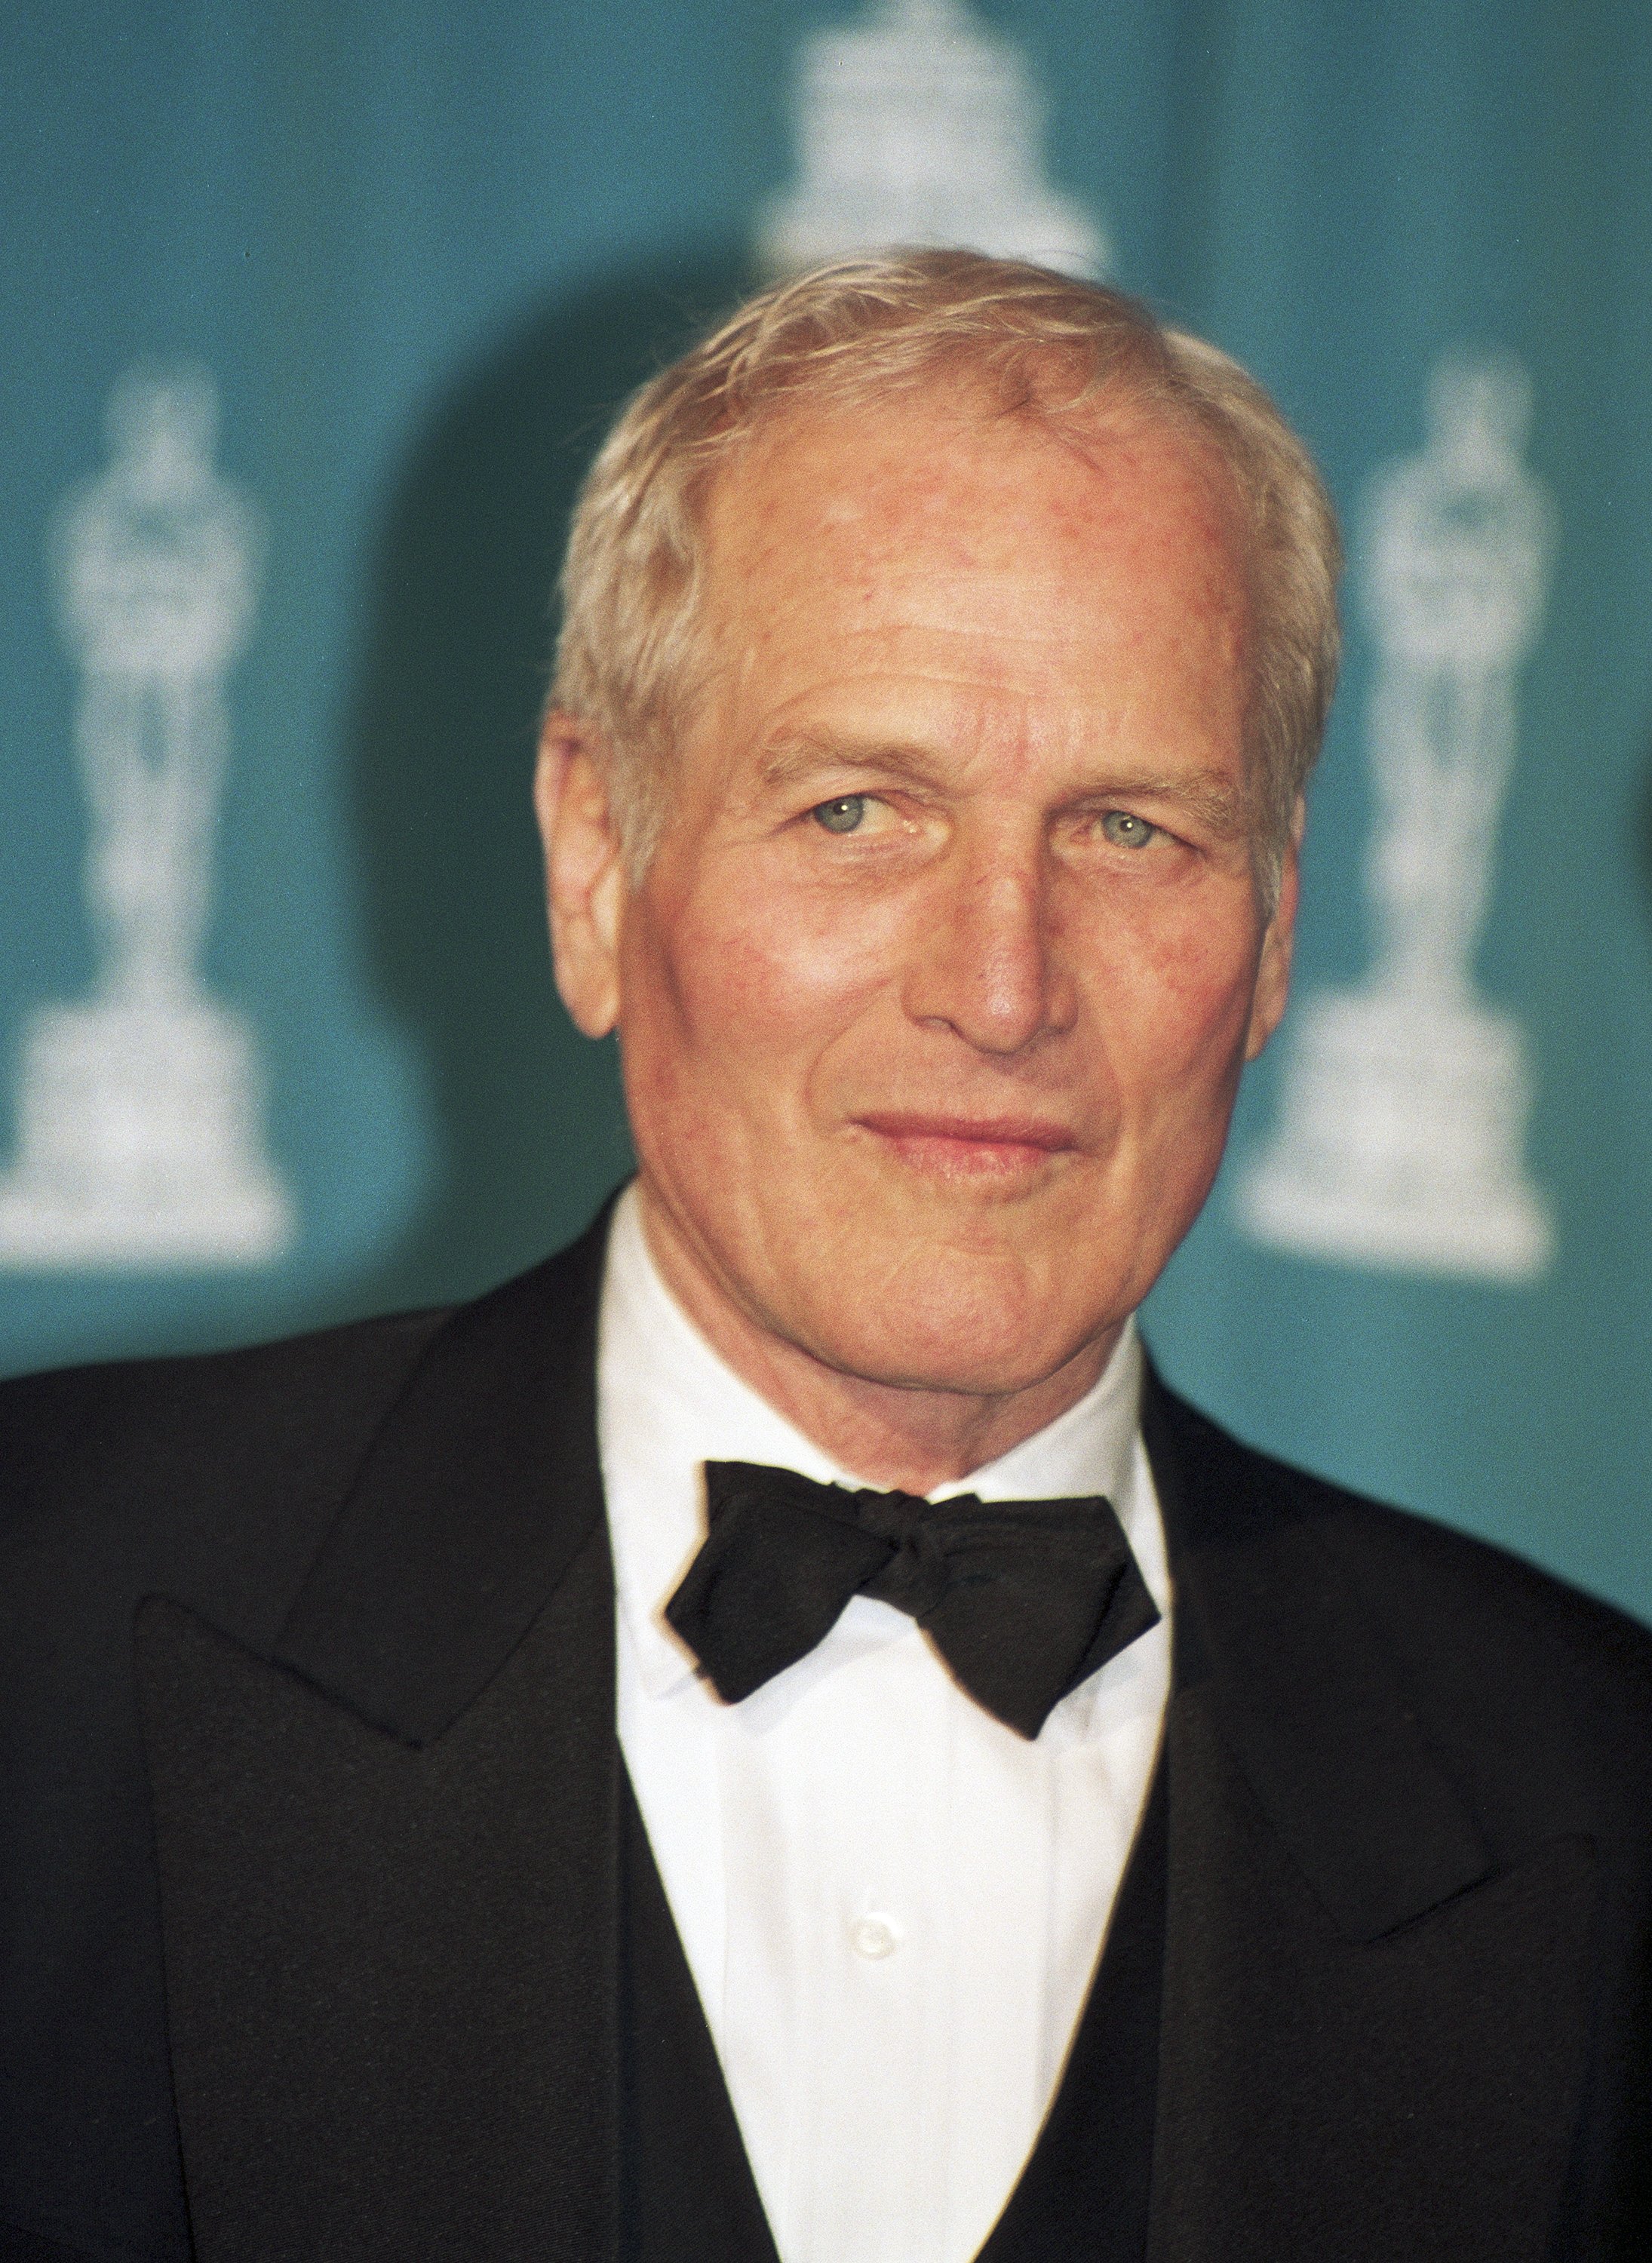 Paul Newman at the Shrine Auditorium during the 67th Annual Academy Awards on March 27,1995 in Los Angeles, California. | Source: Getty Images